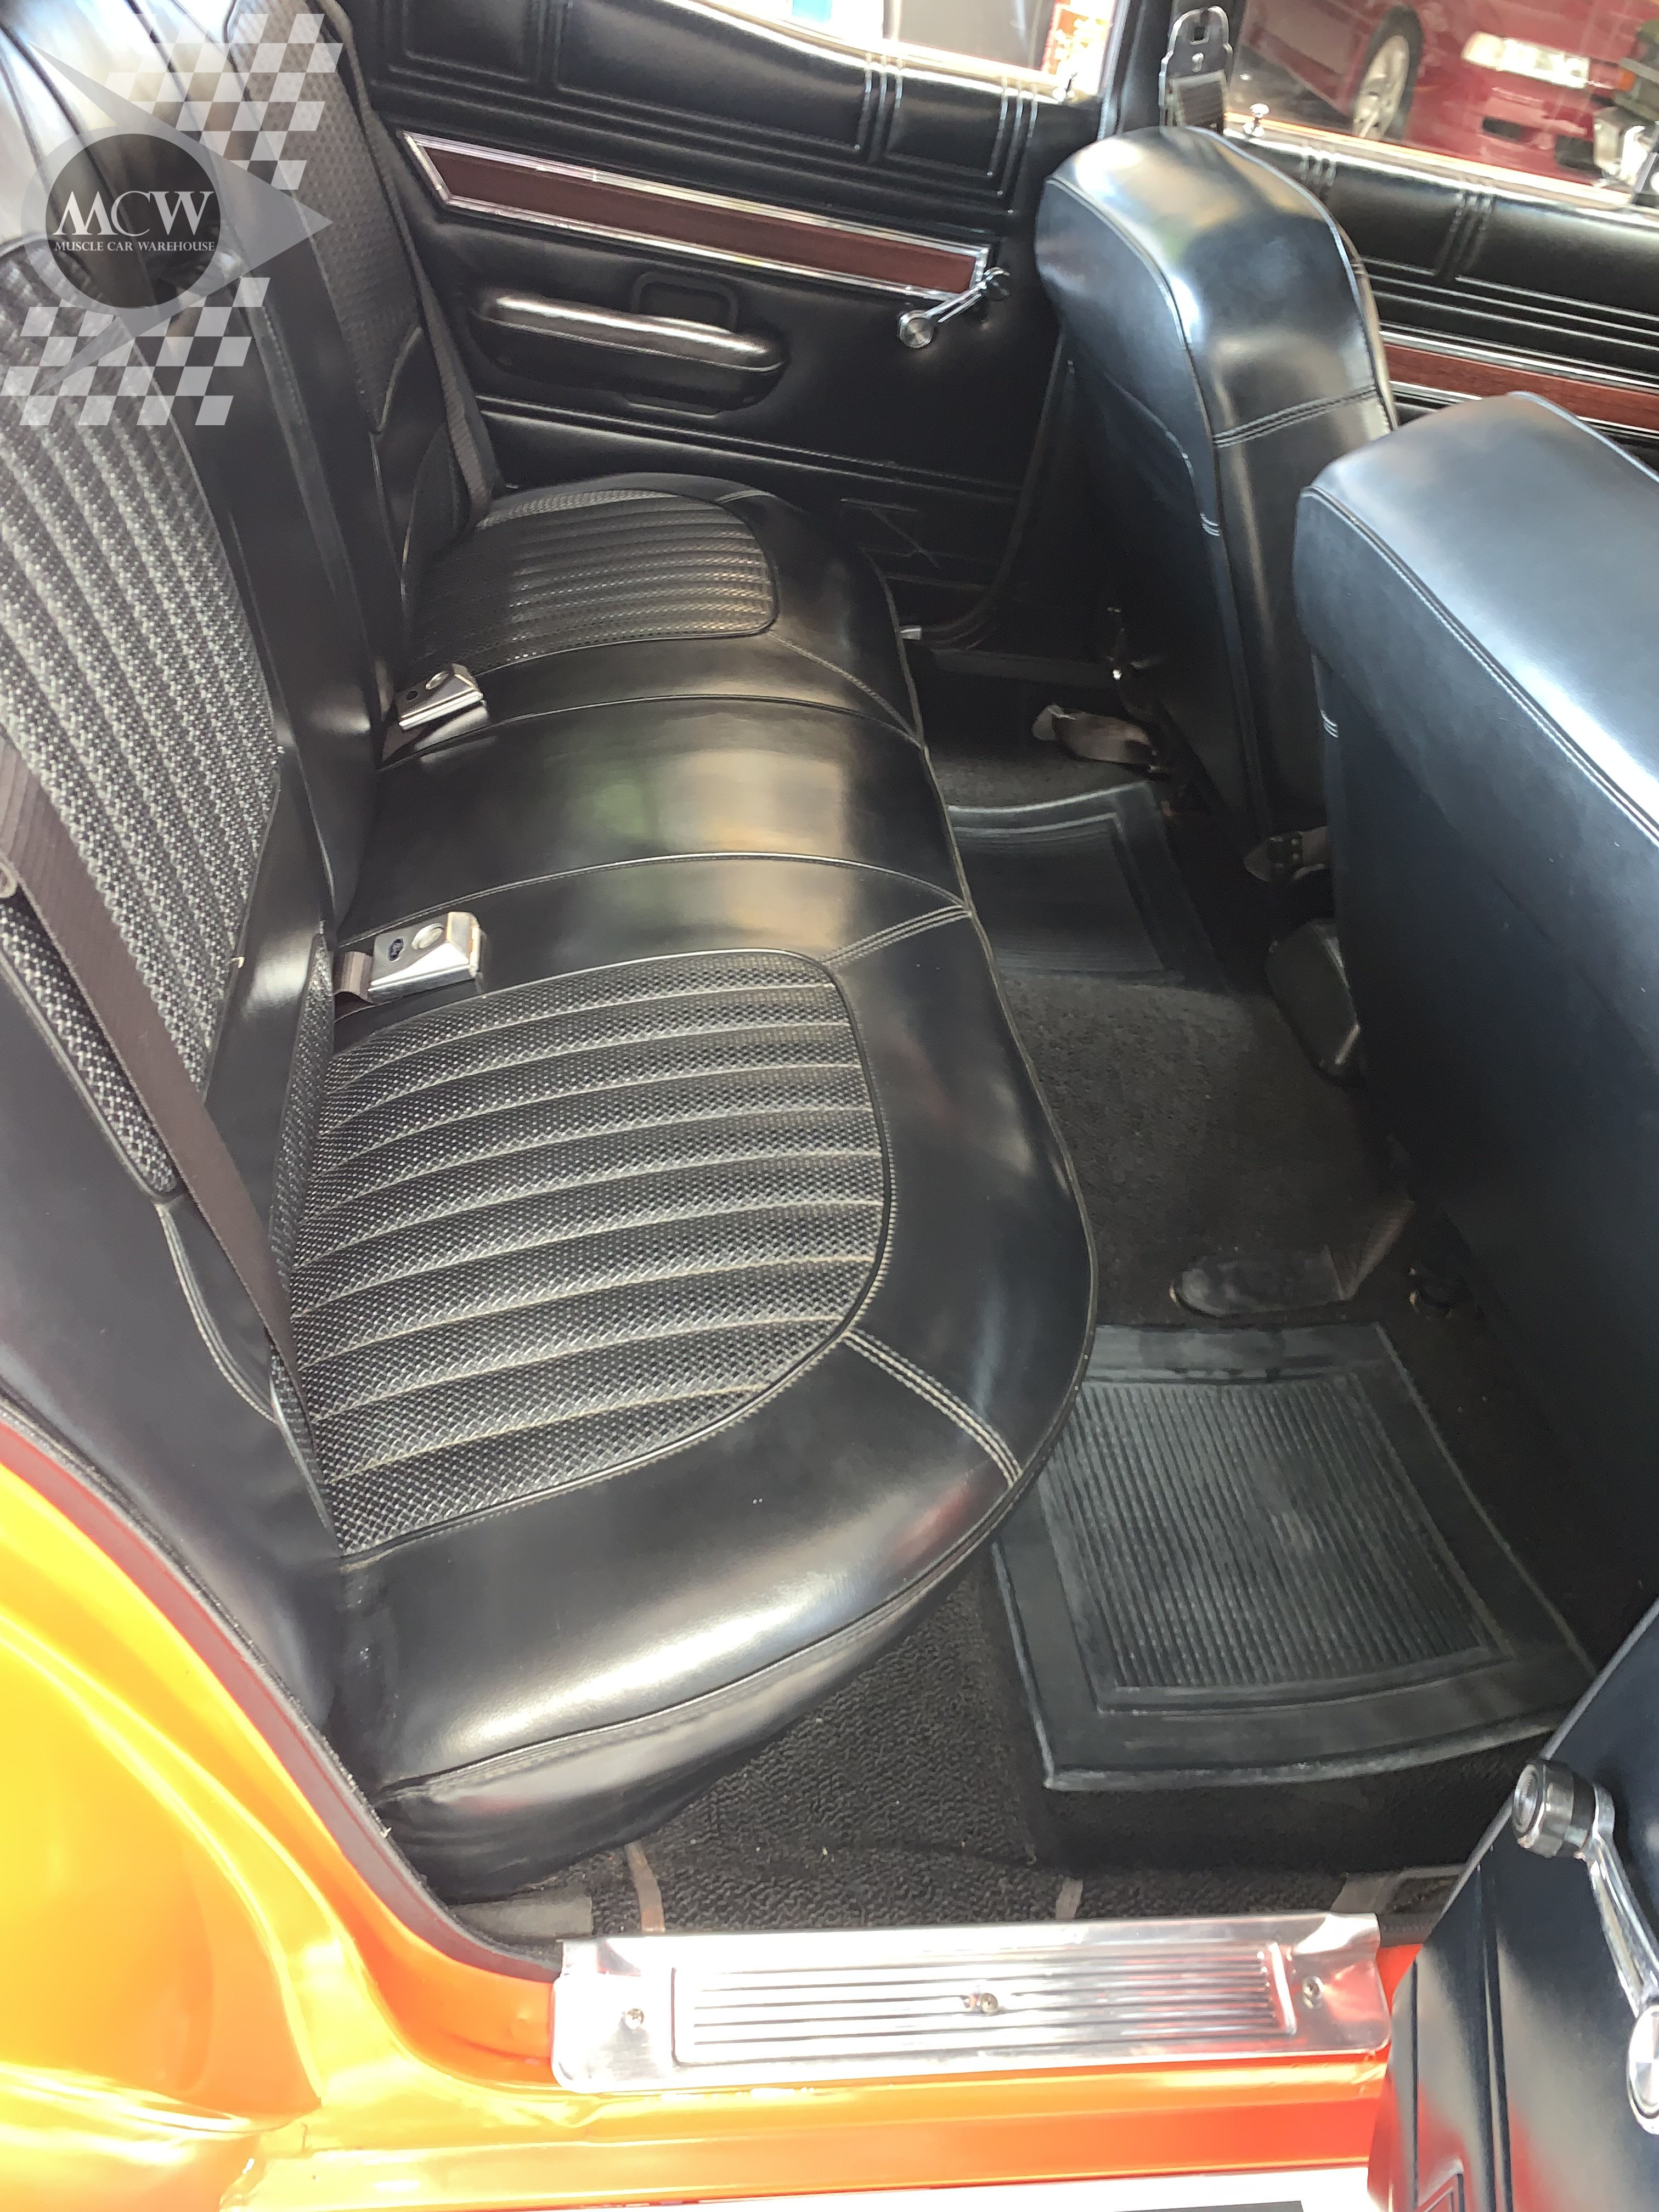 1970 XW Falcon GTHO Phase 2 Interior | Muscle Car Warehouse